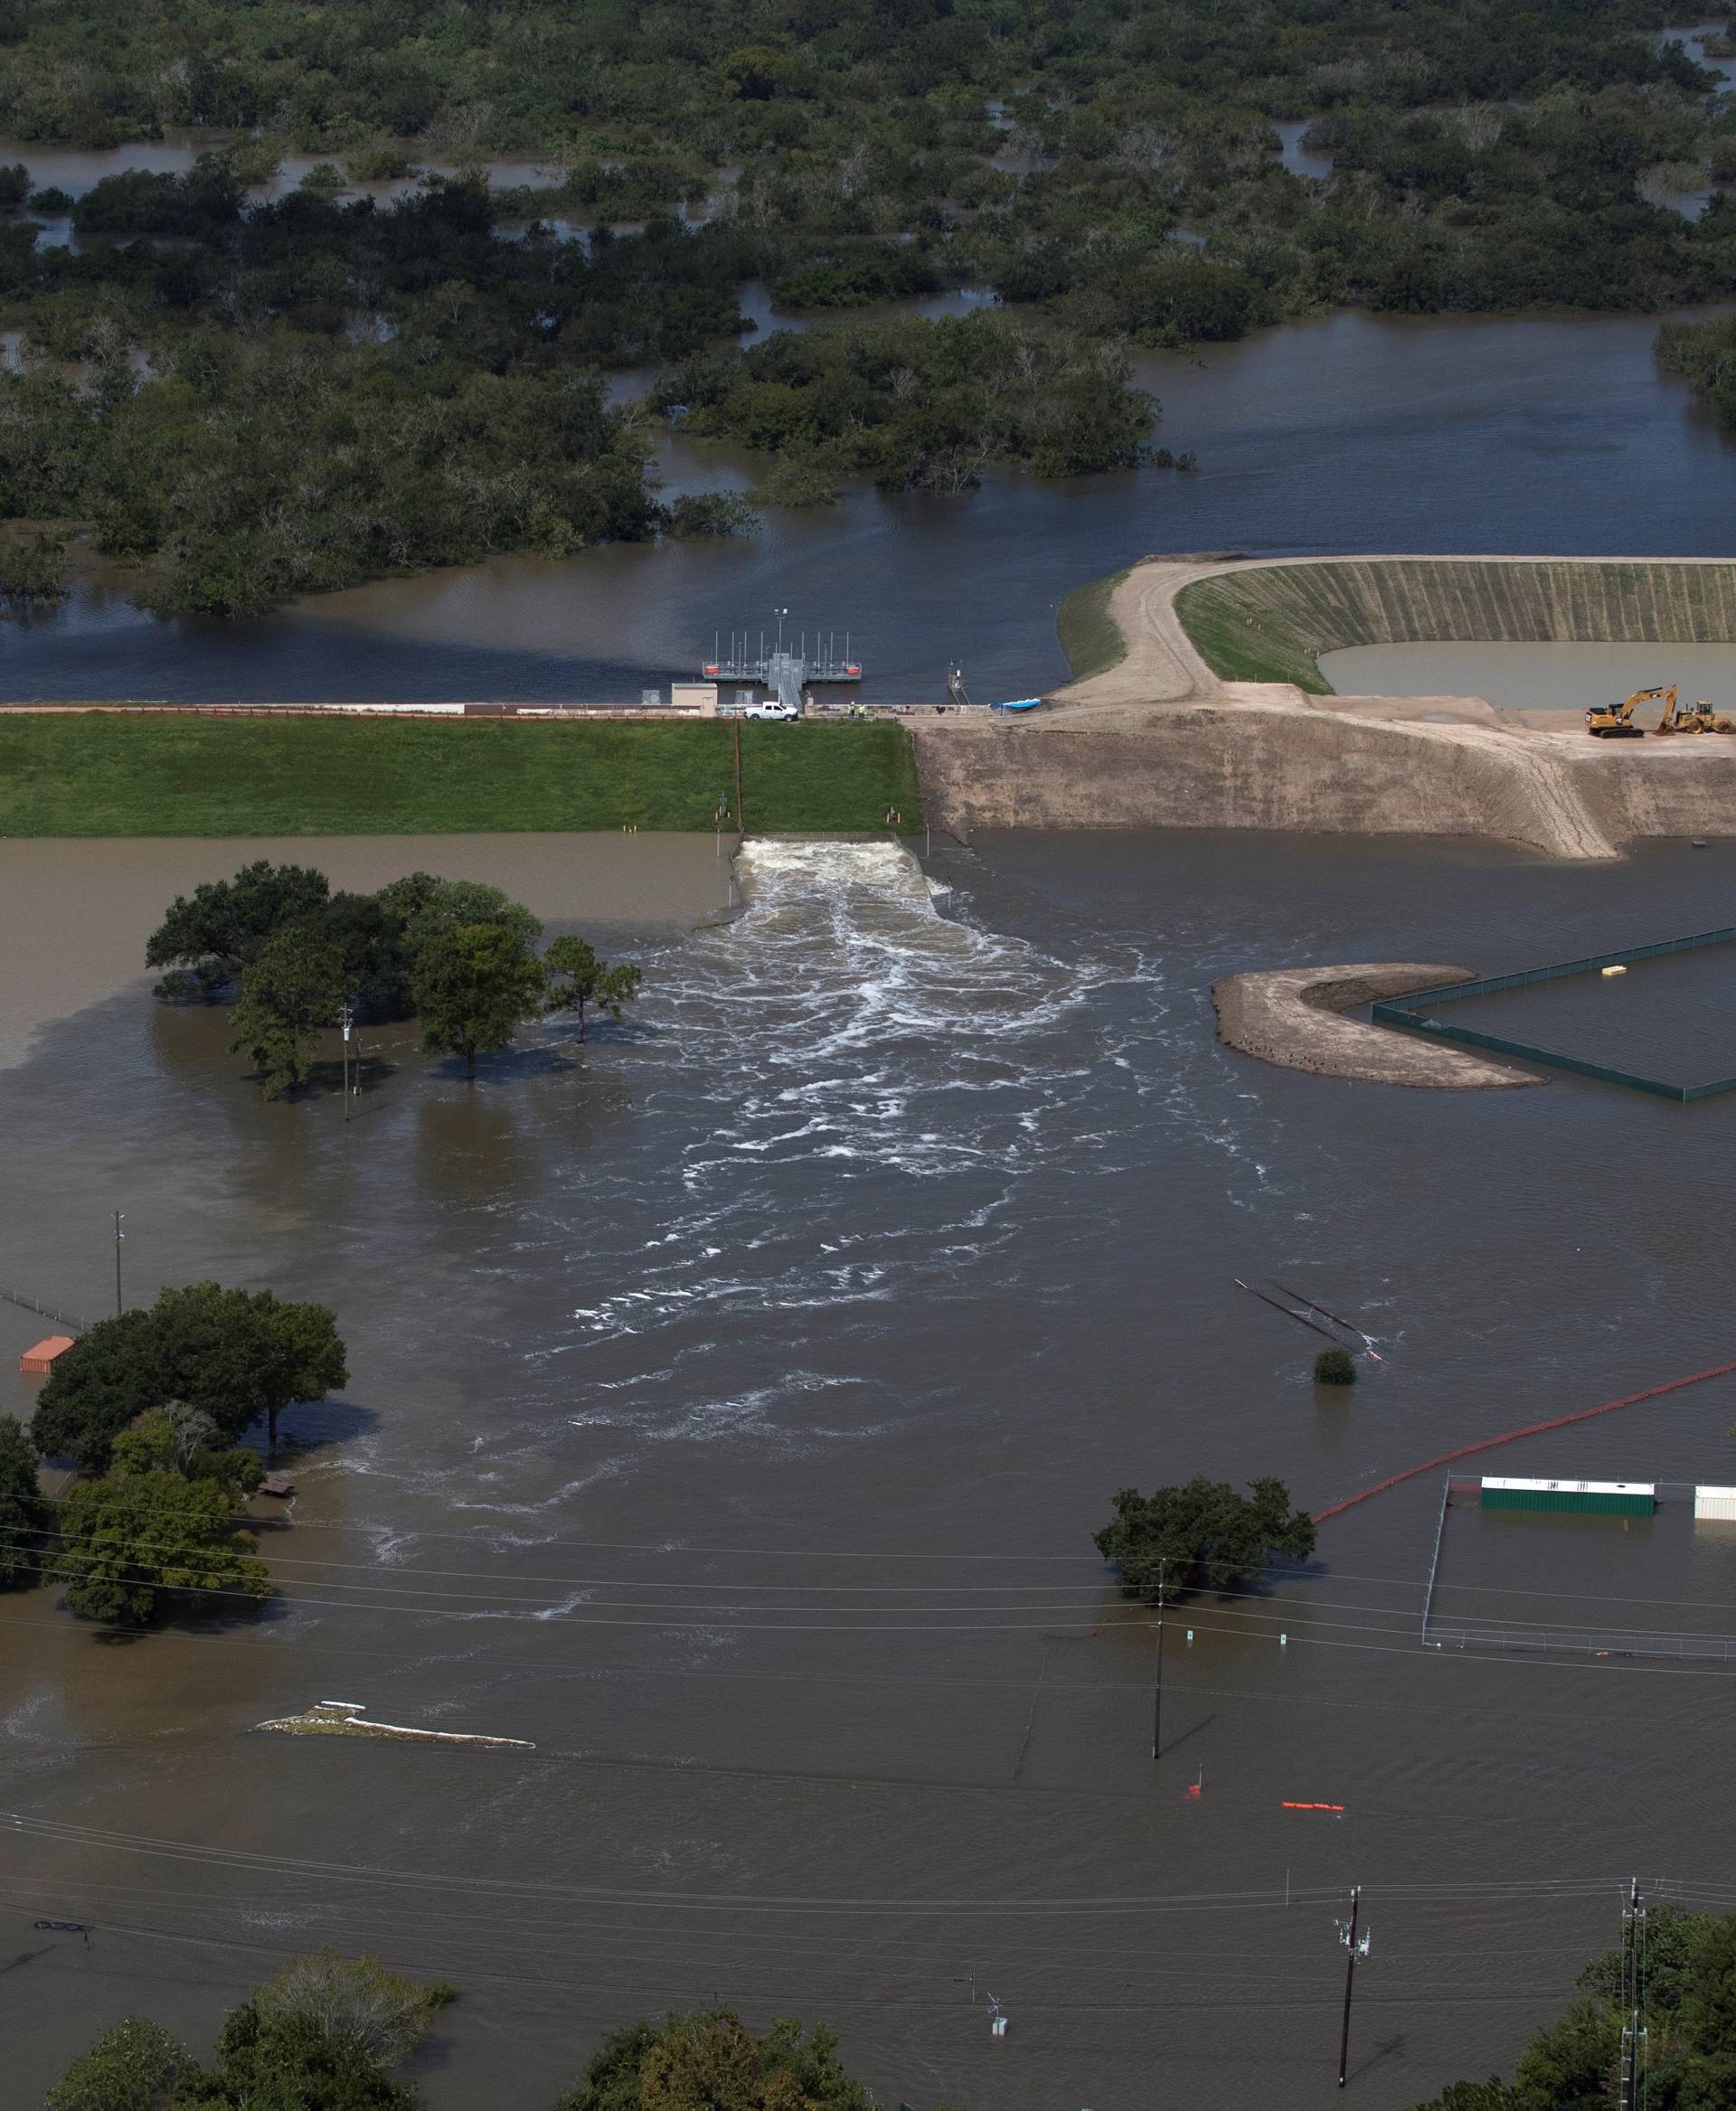 Rain water caused by Tropical Storm Harvey is released from the Barker Reservoir in West Houston, Texas